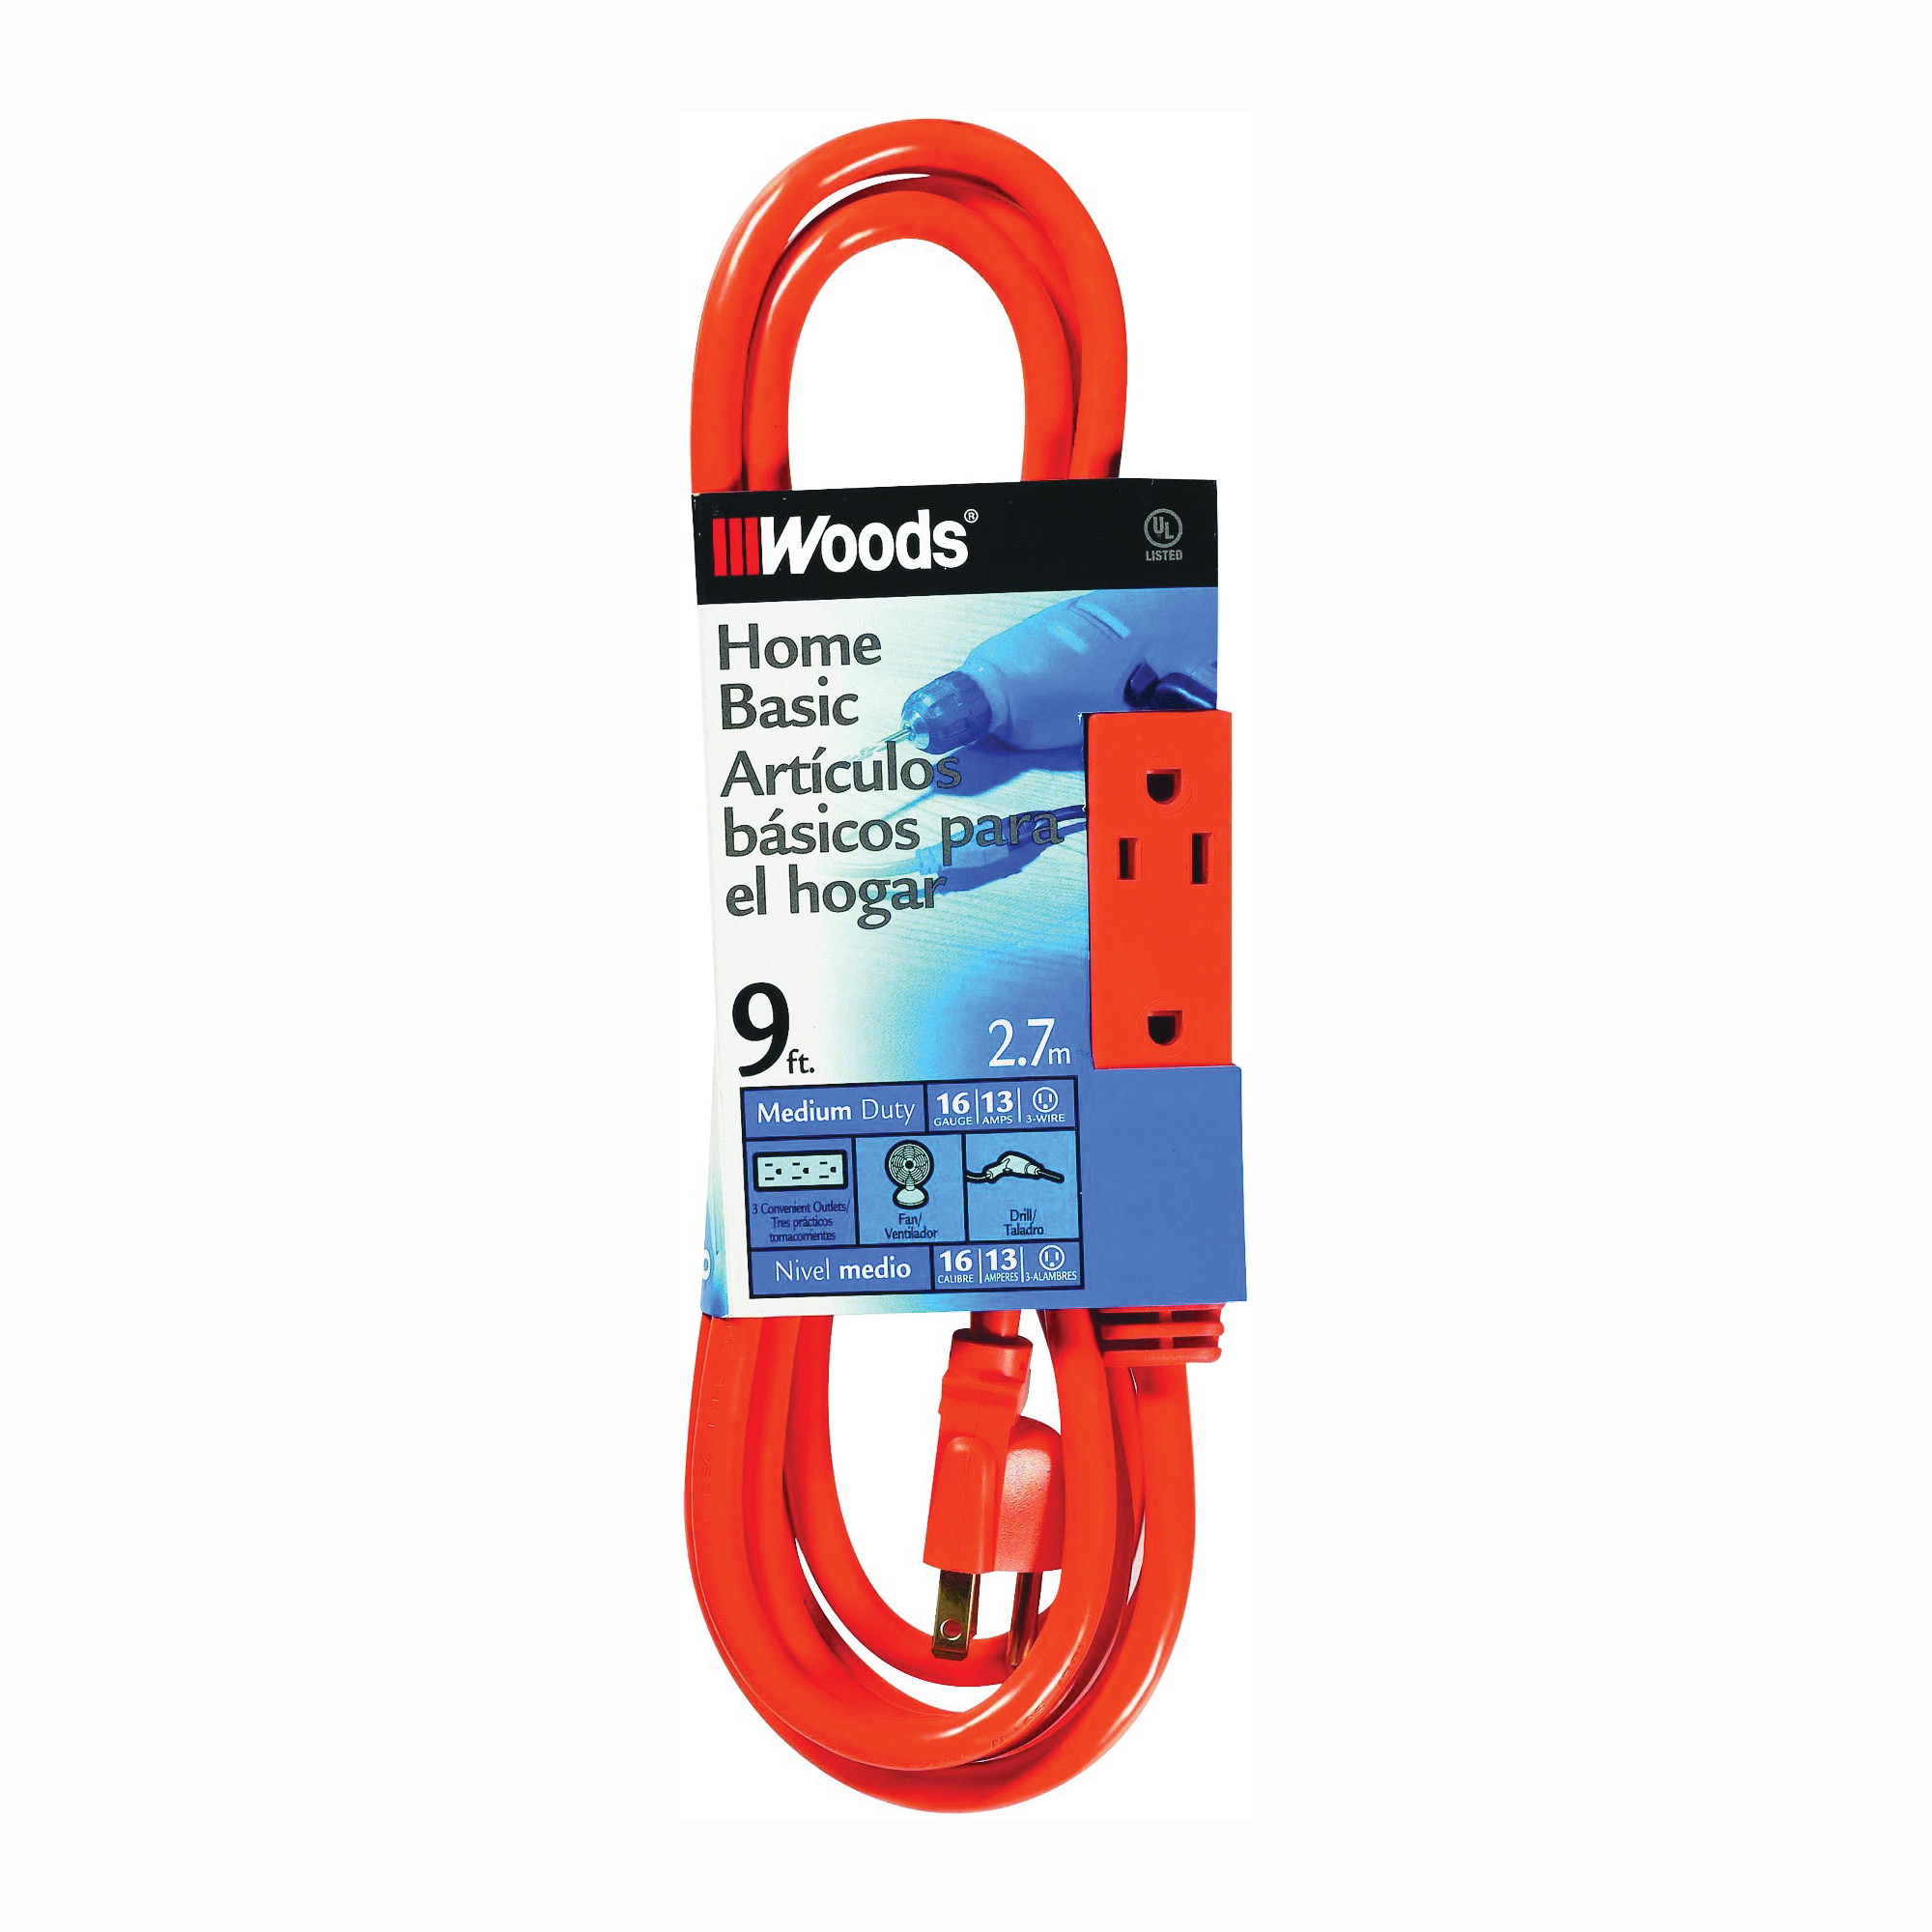 CCI 2864 Extension Cord, 16 AWG Cable, 9 ft L, 13 A, Orange